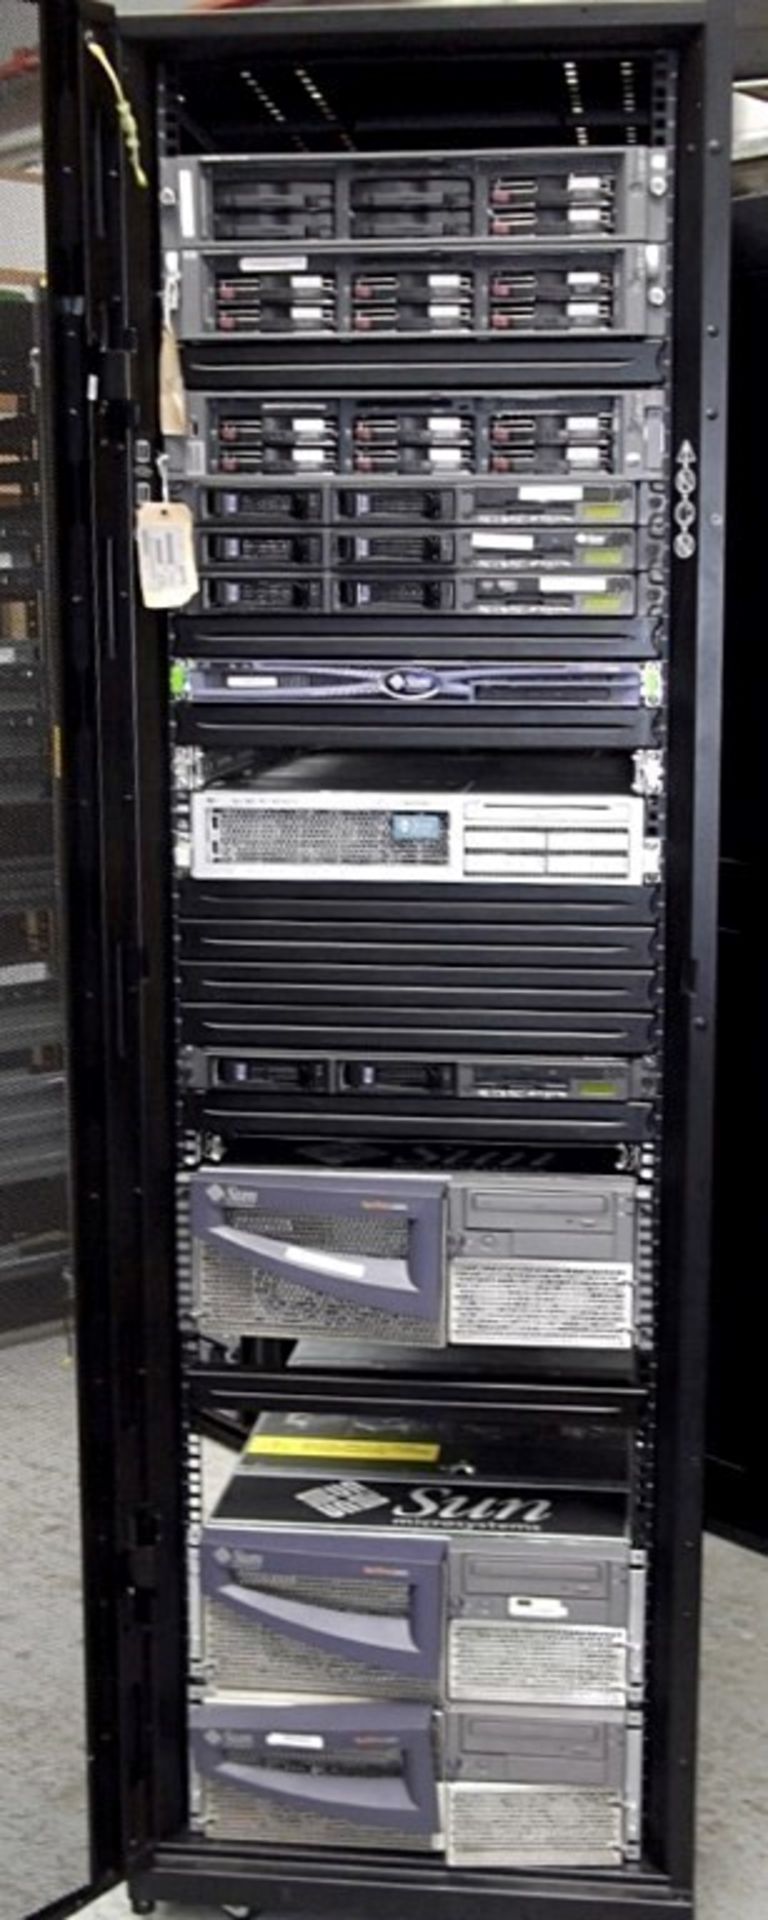 1 x APC Netshelter Server Rack With 12 x Assorted Sun Fire & HP Proliant Filer Systems Including